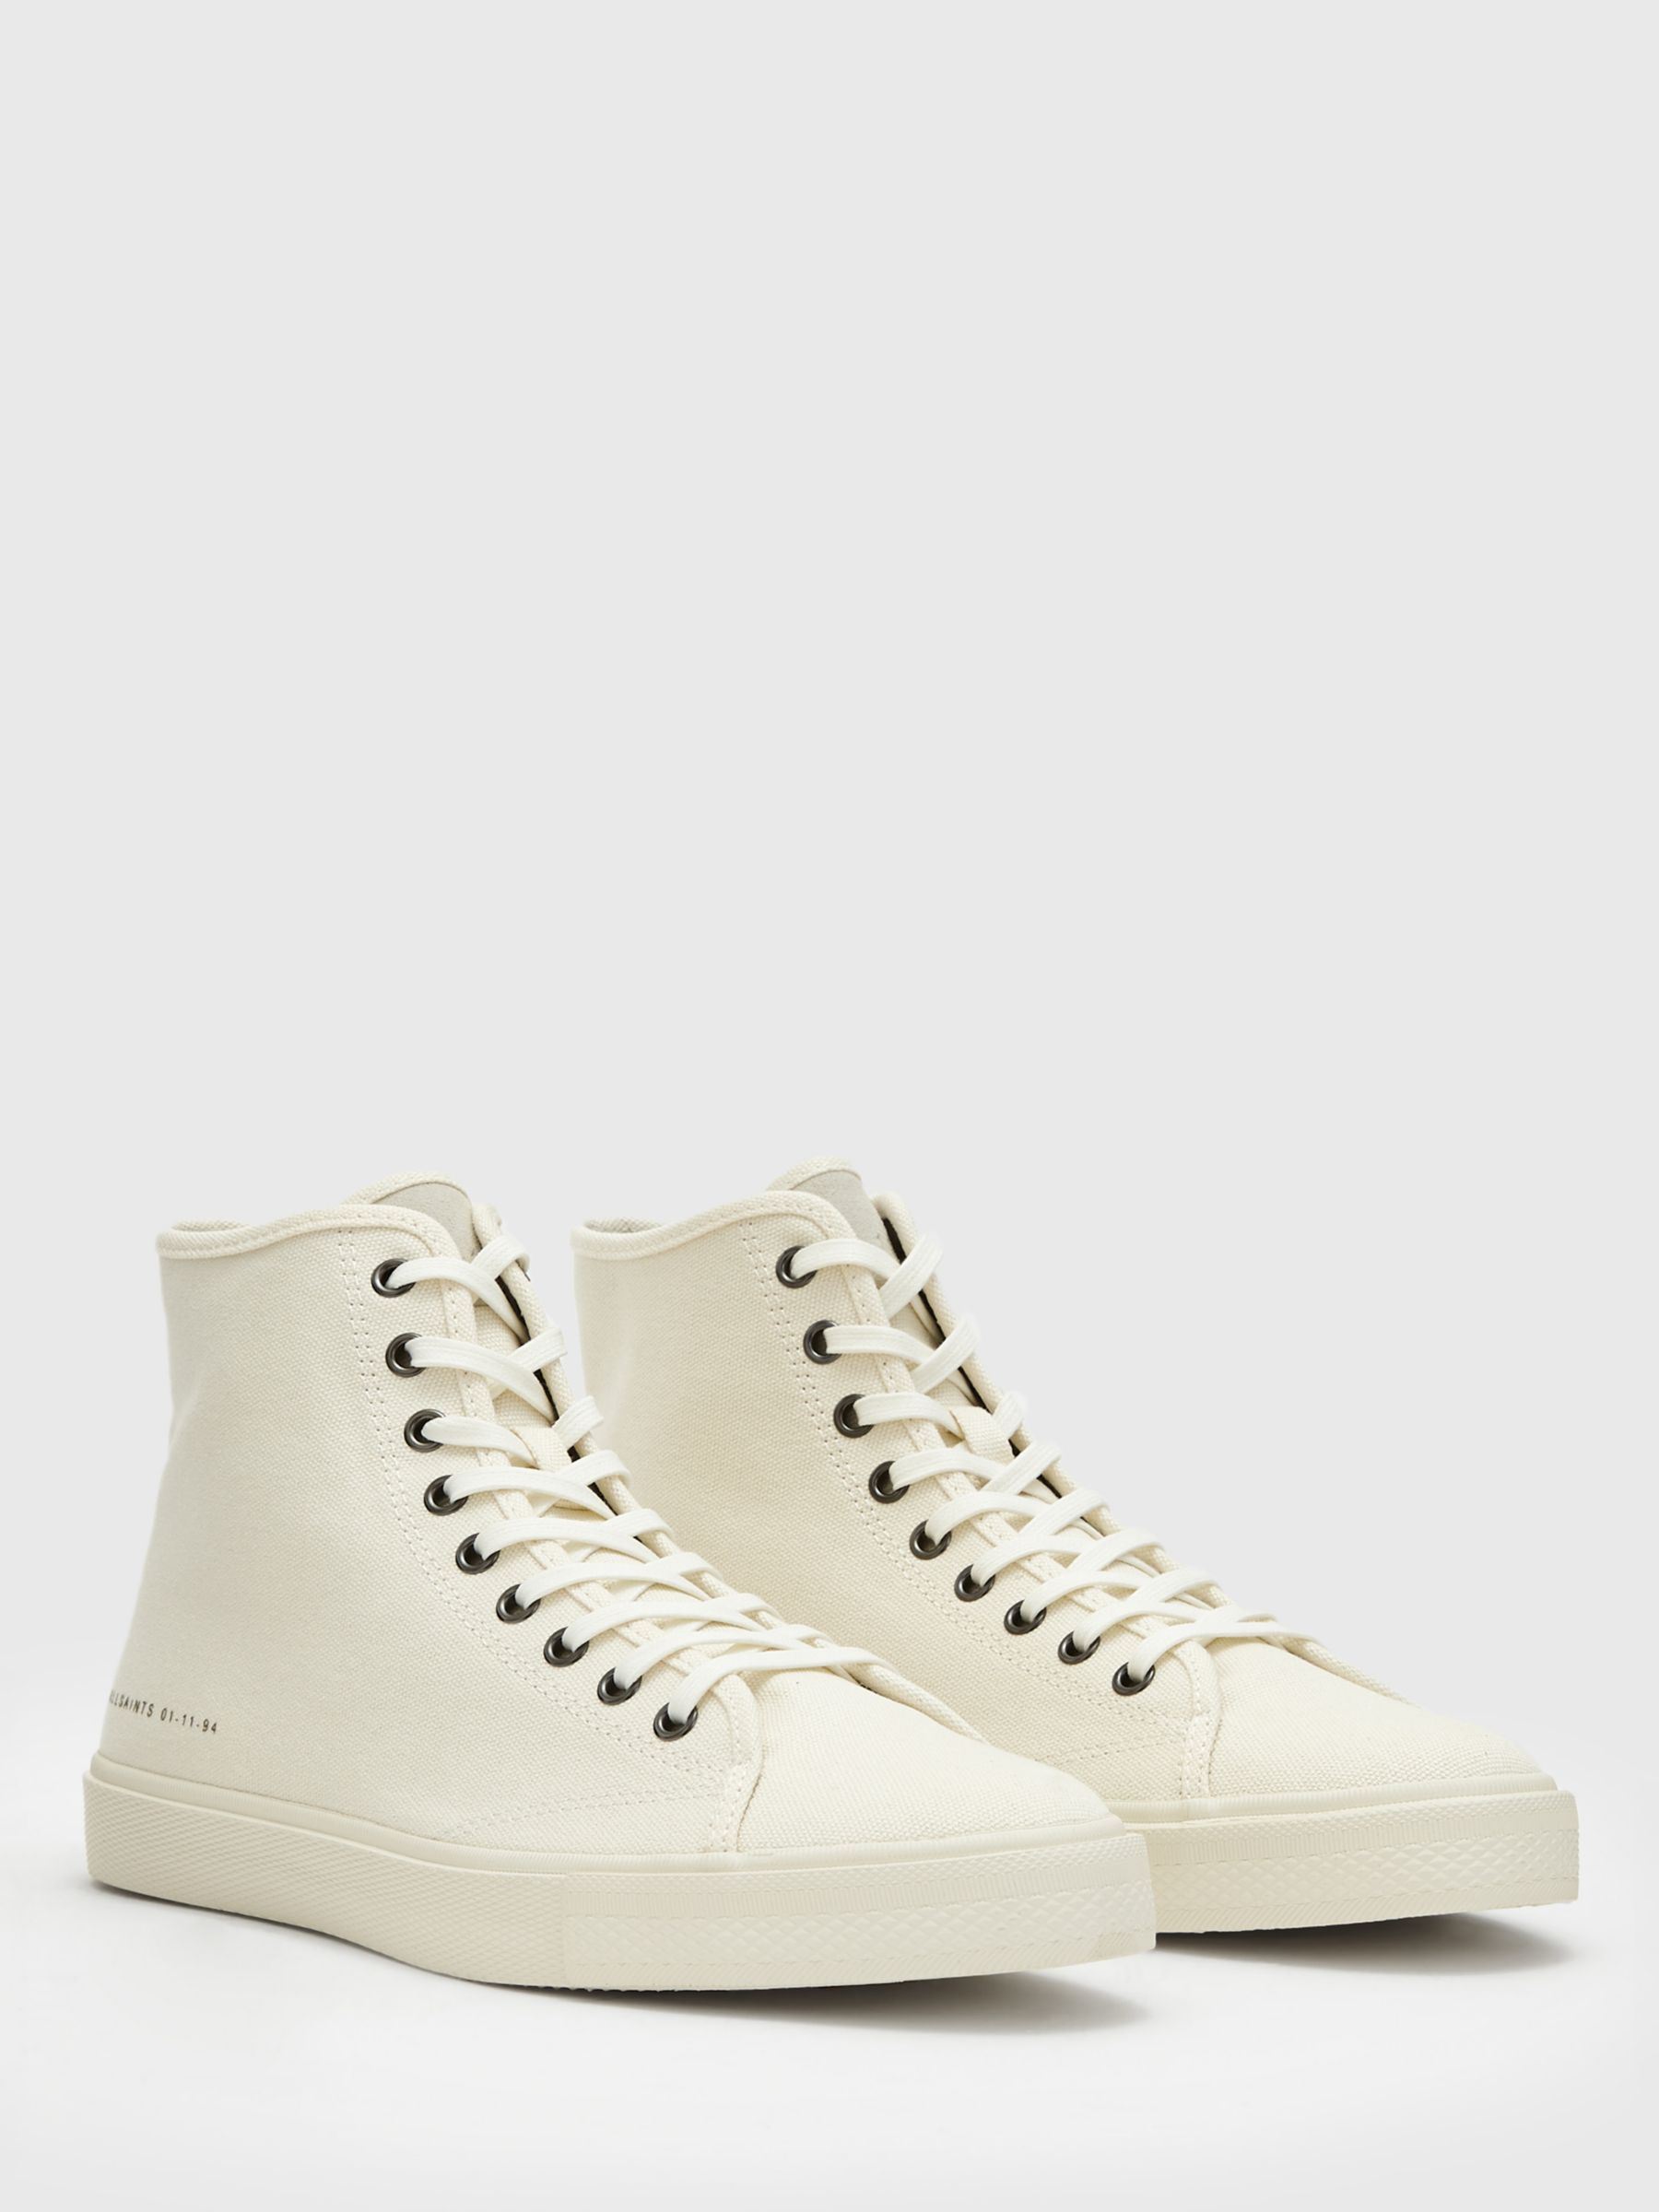 AllSaints Bryce Canvas High Top Trainers, Off White, 6